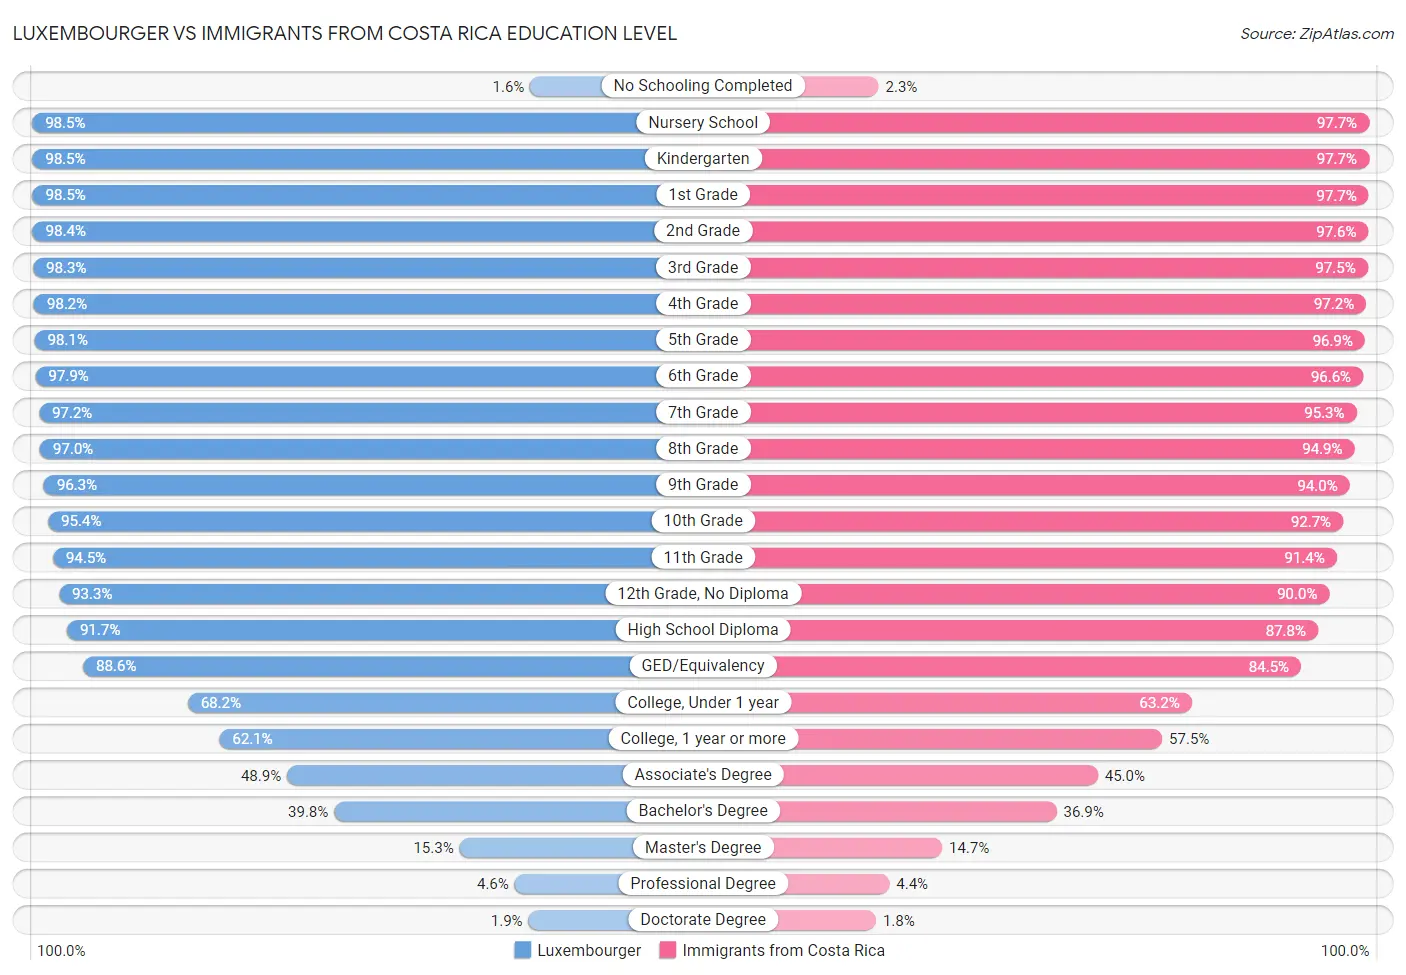 Luxembourger vs Immigrants from Costa Rica Education Level